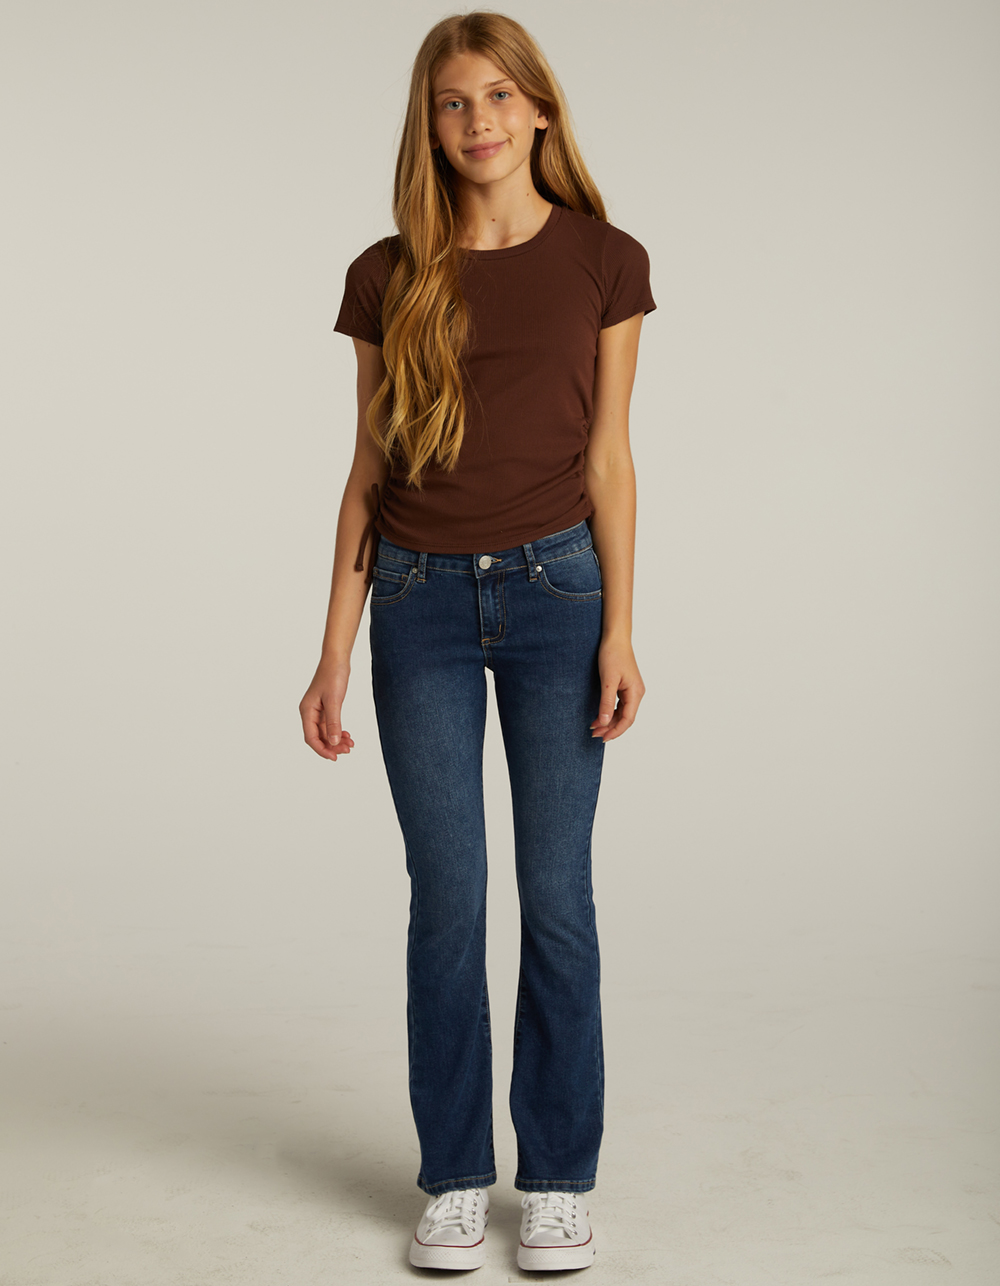 RSQ Girls Low Rise Flare Jeans - Dark Wash